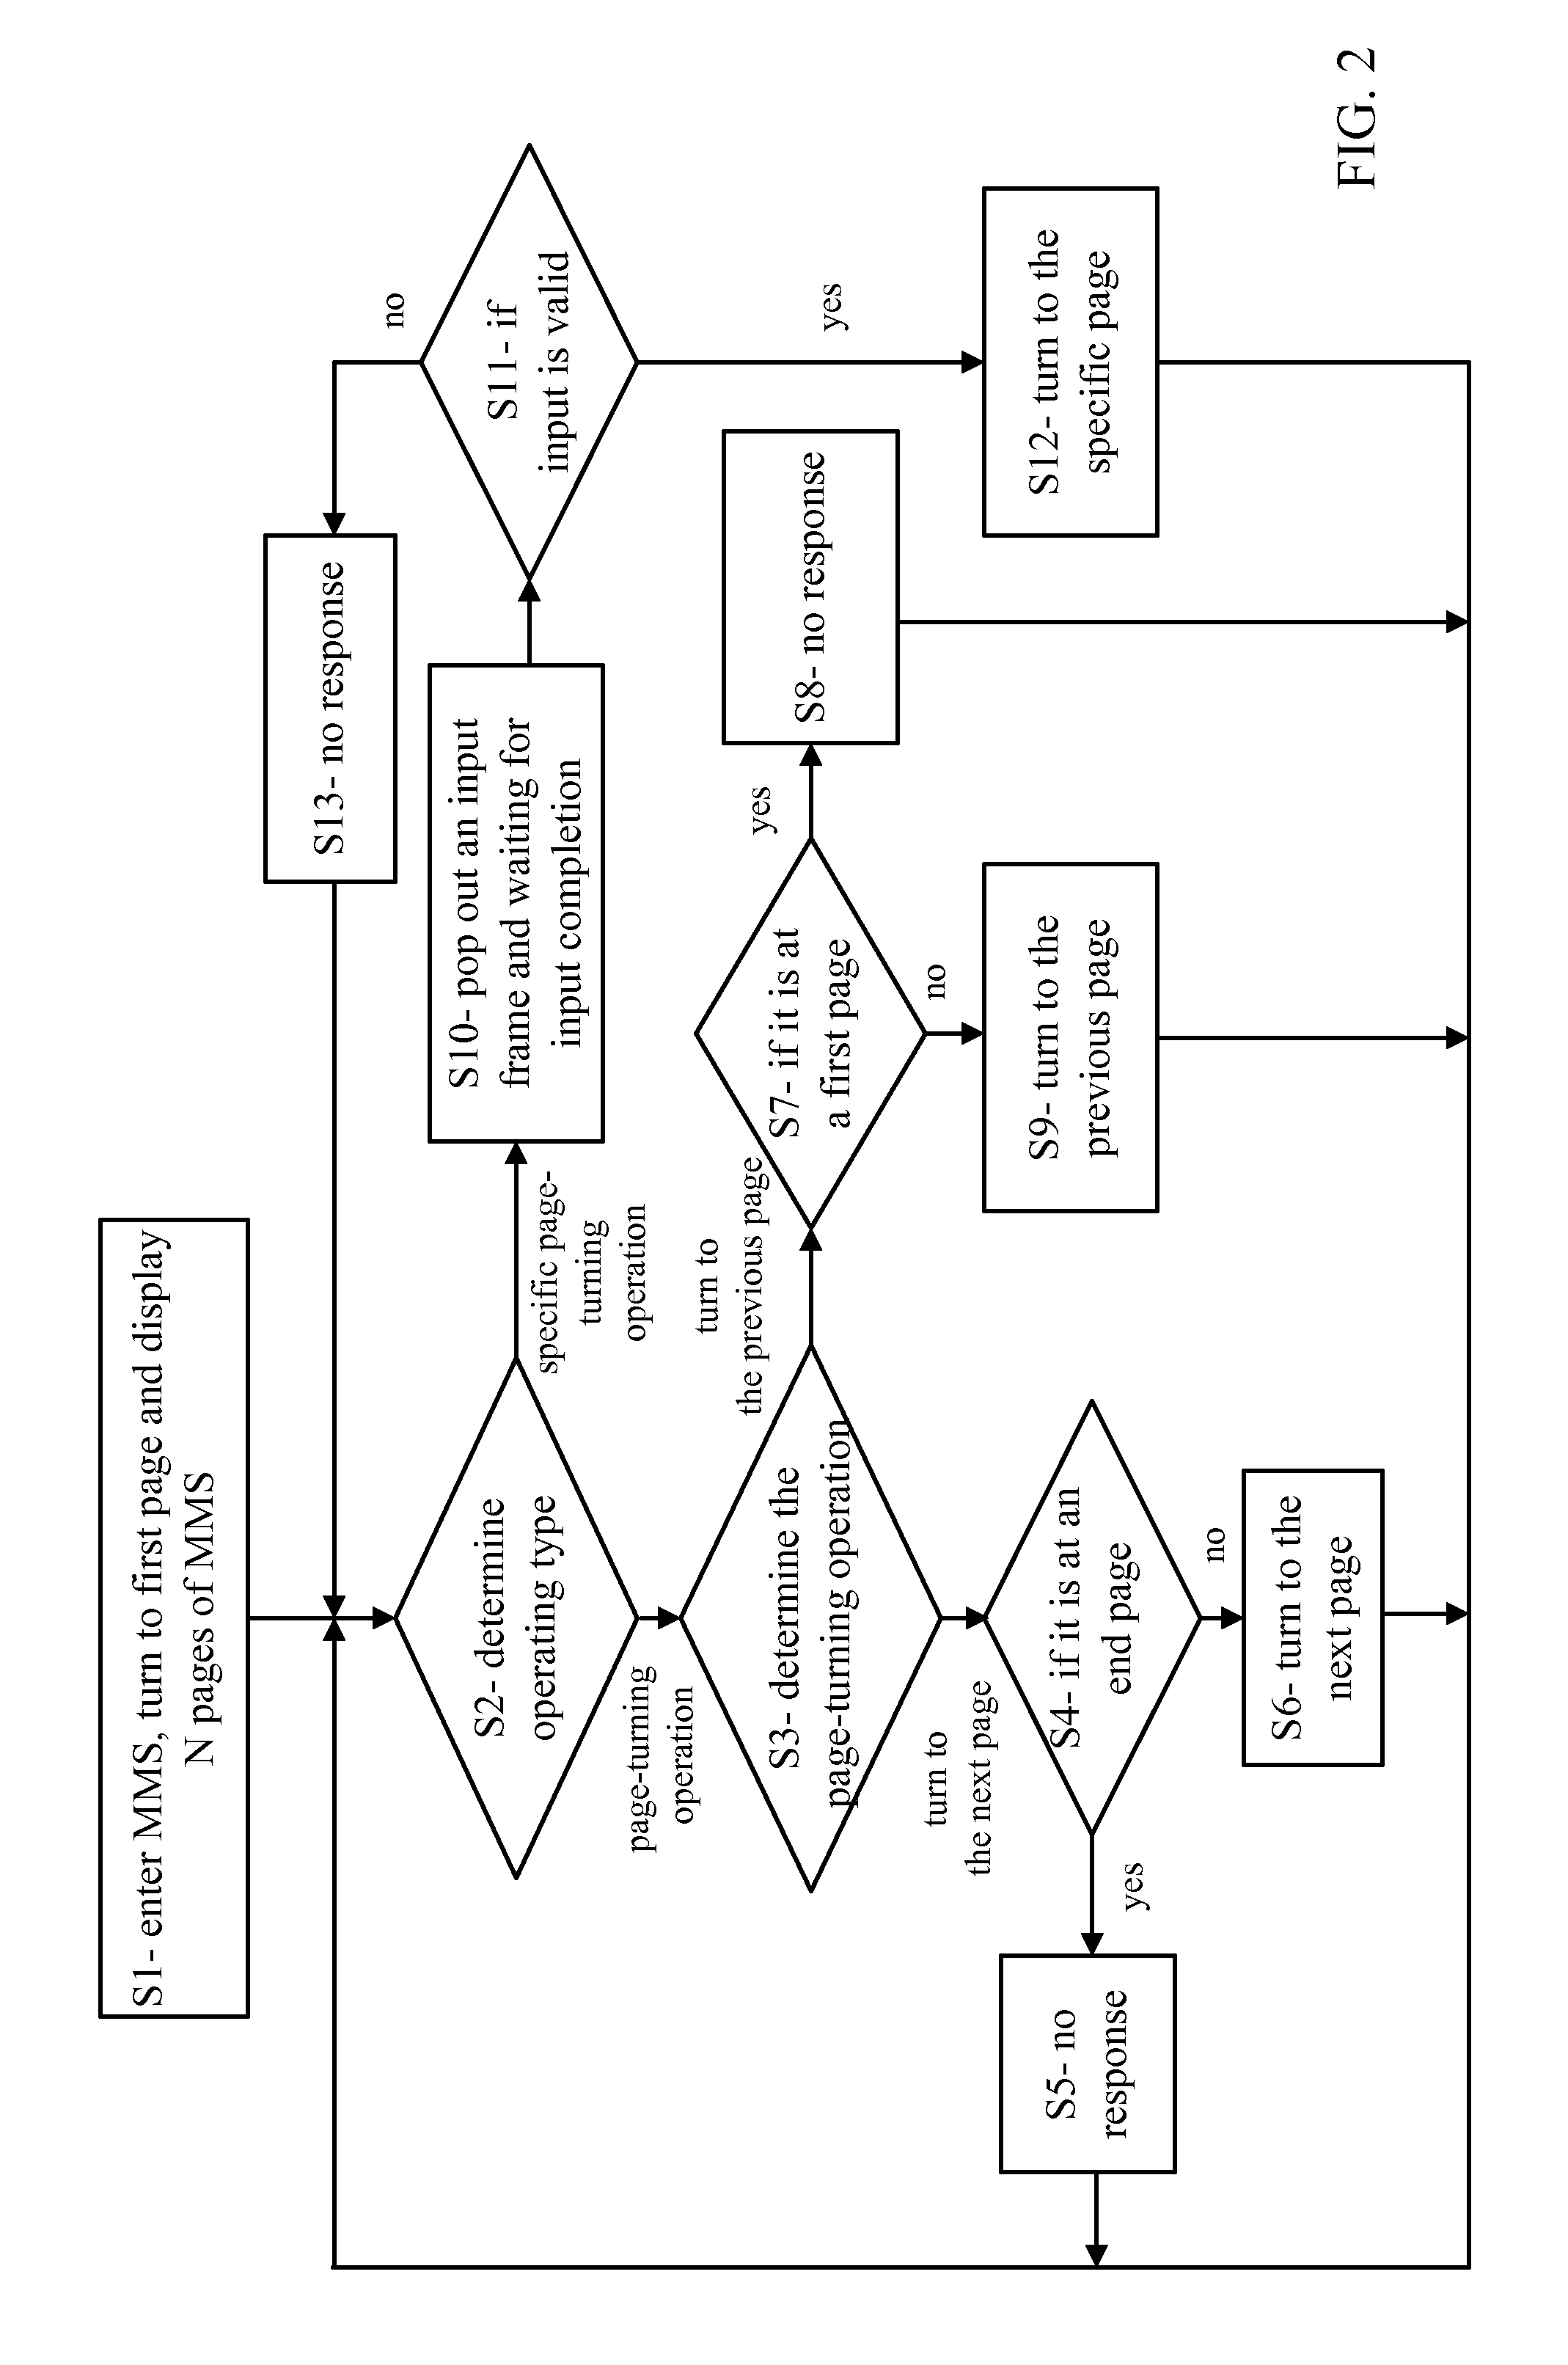 Page-turning and operating method for reading multimedia messaging service message of a mobile phone